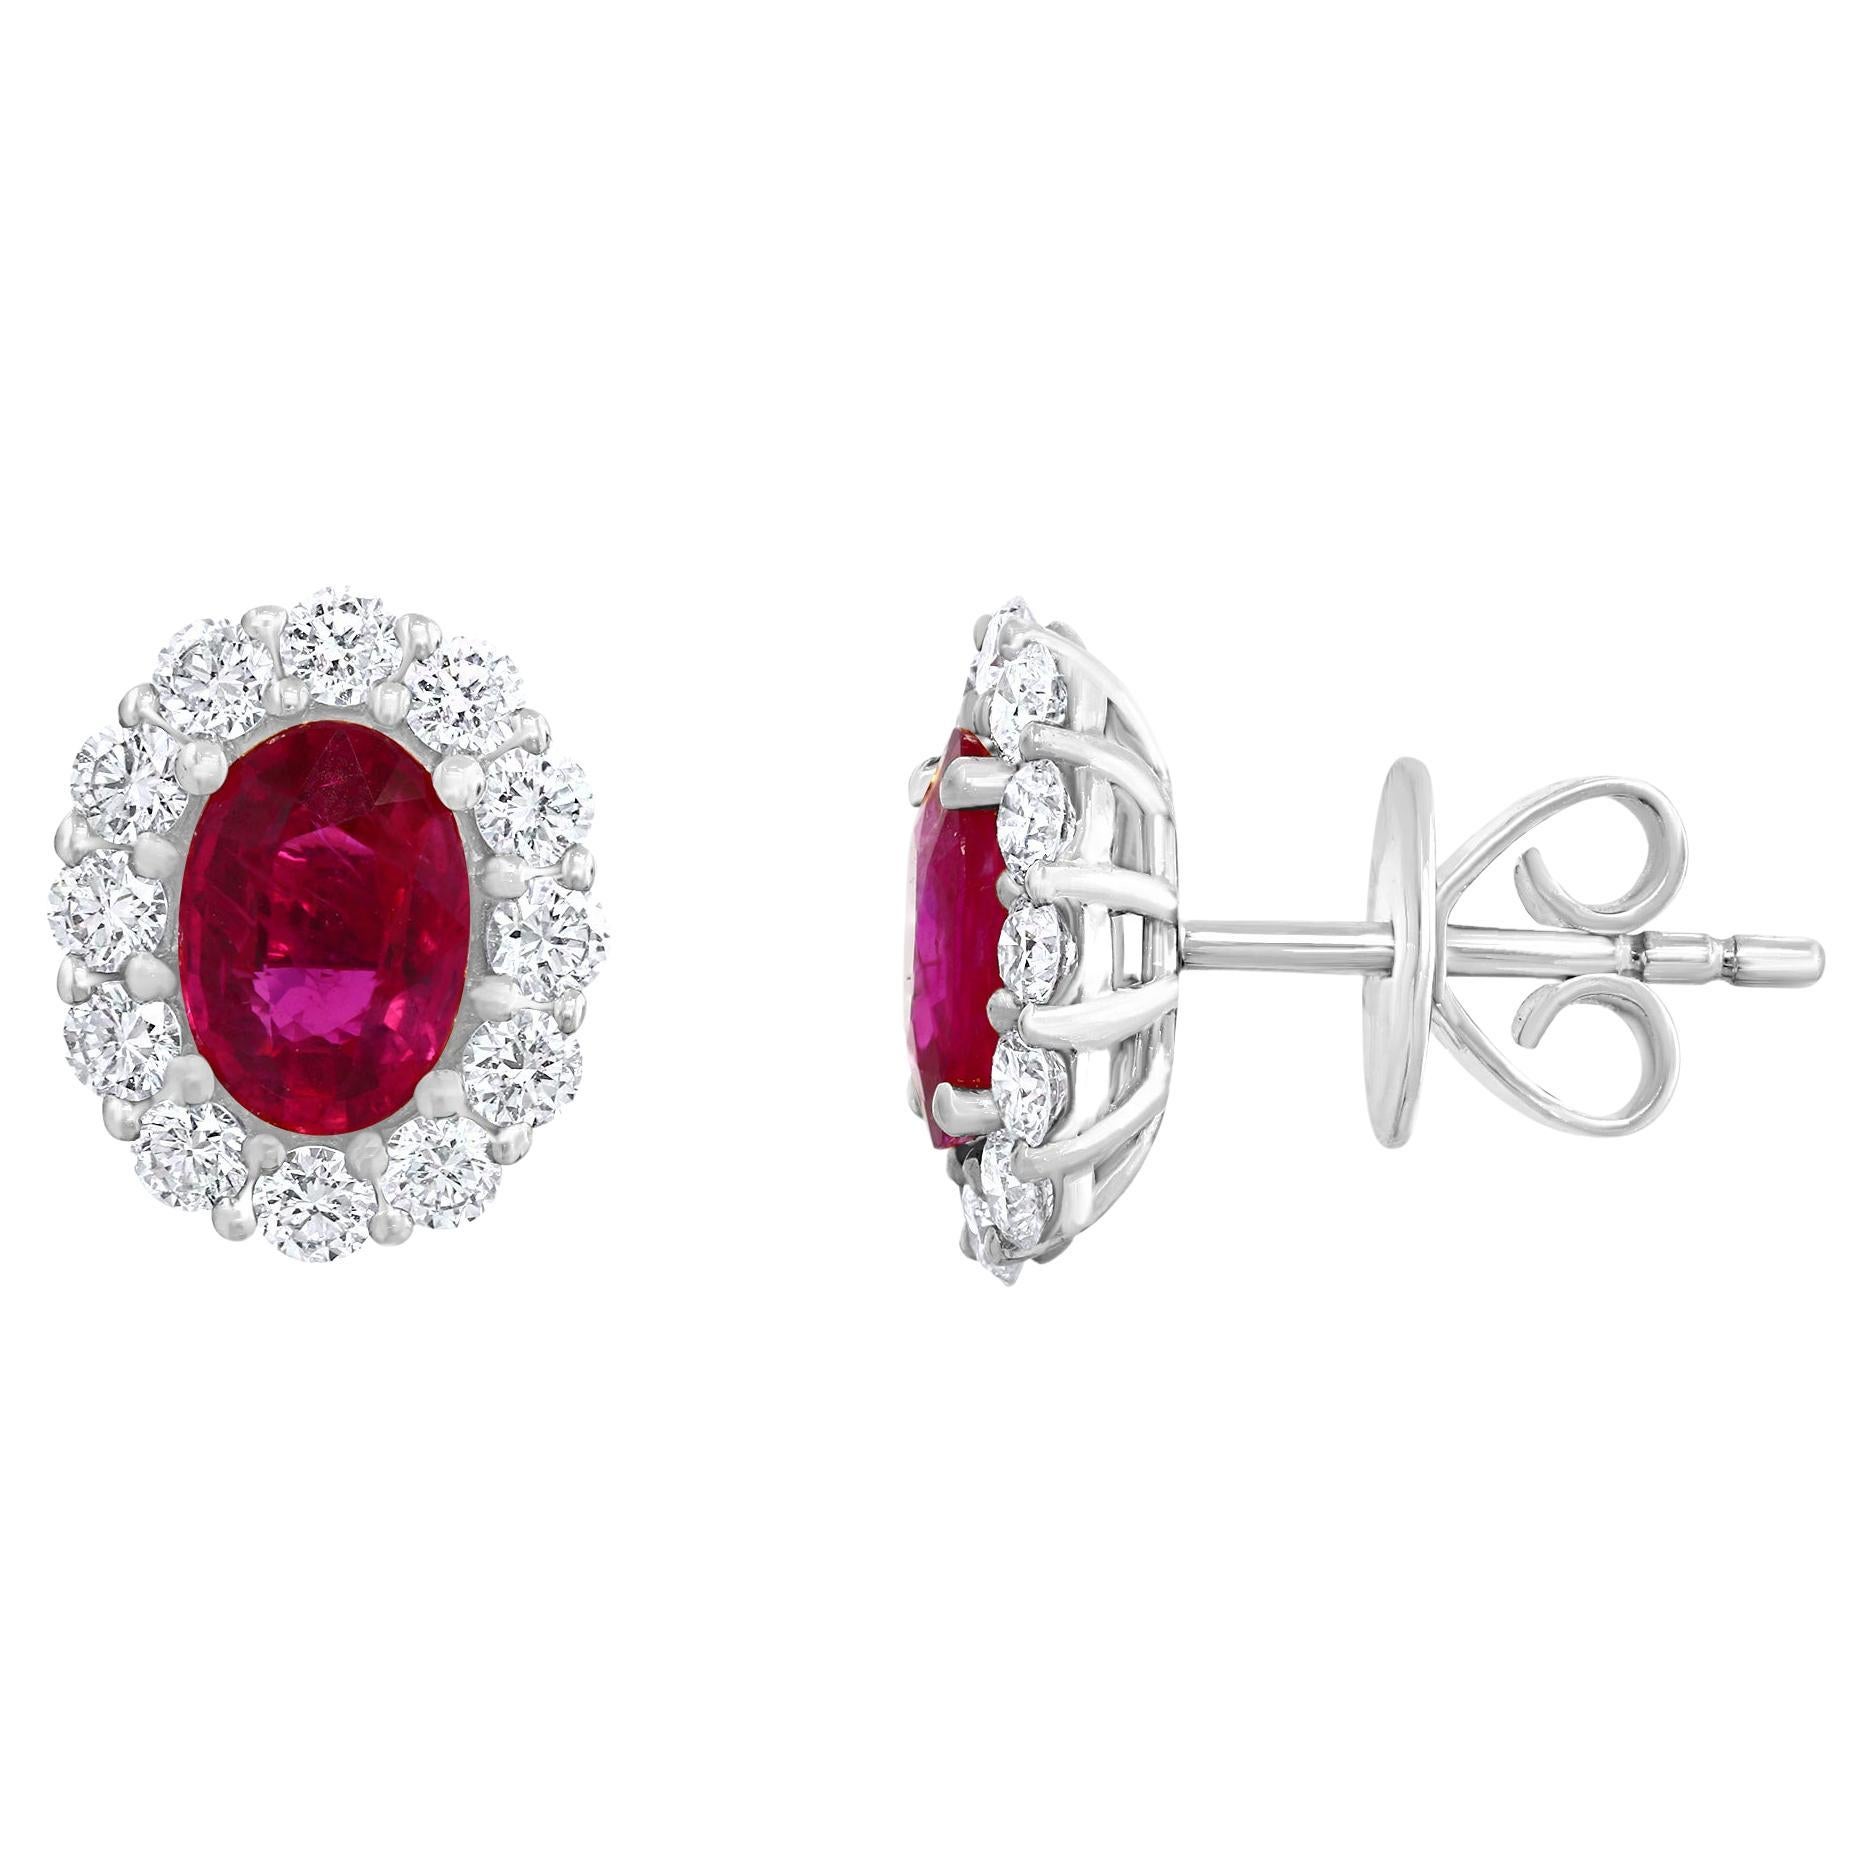 1.45 Carat Oval Cut Ruby and Diamond Stud Earrings in 18K White Gold For Sale